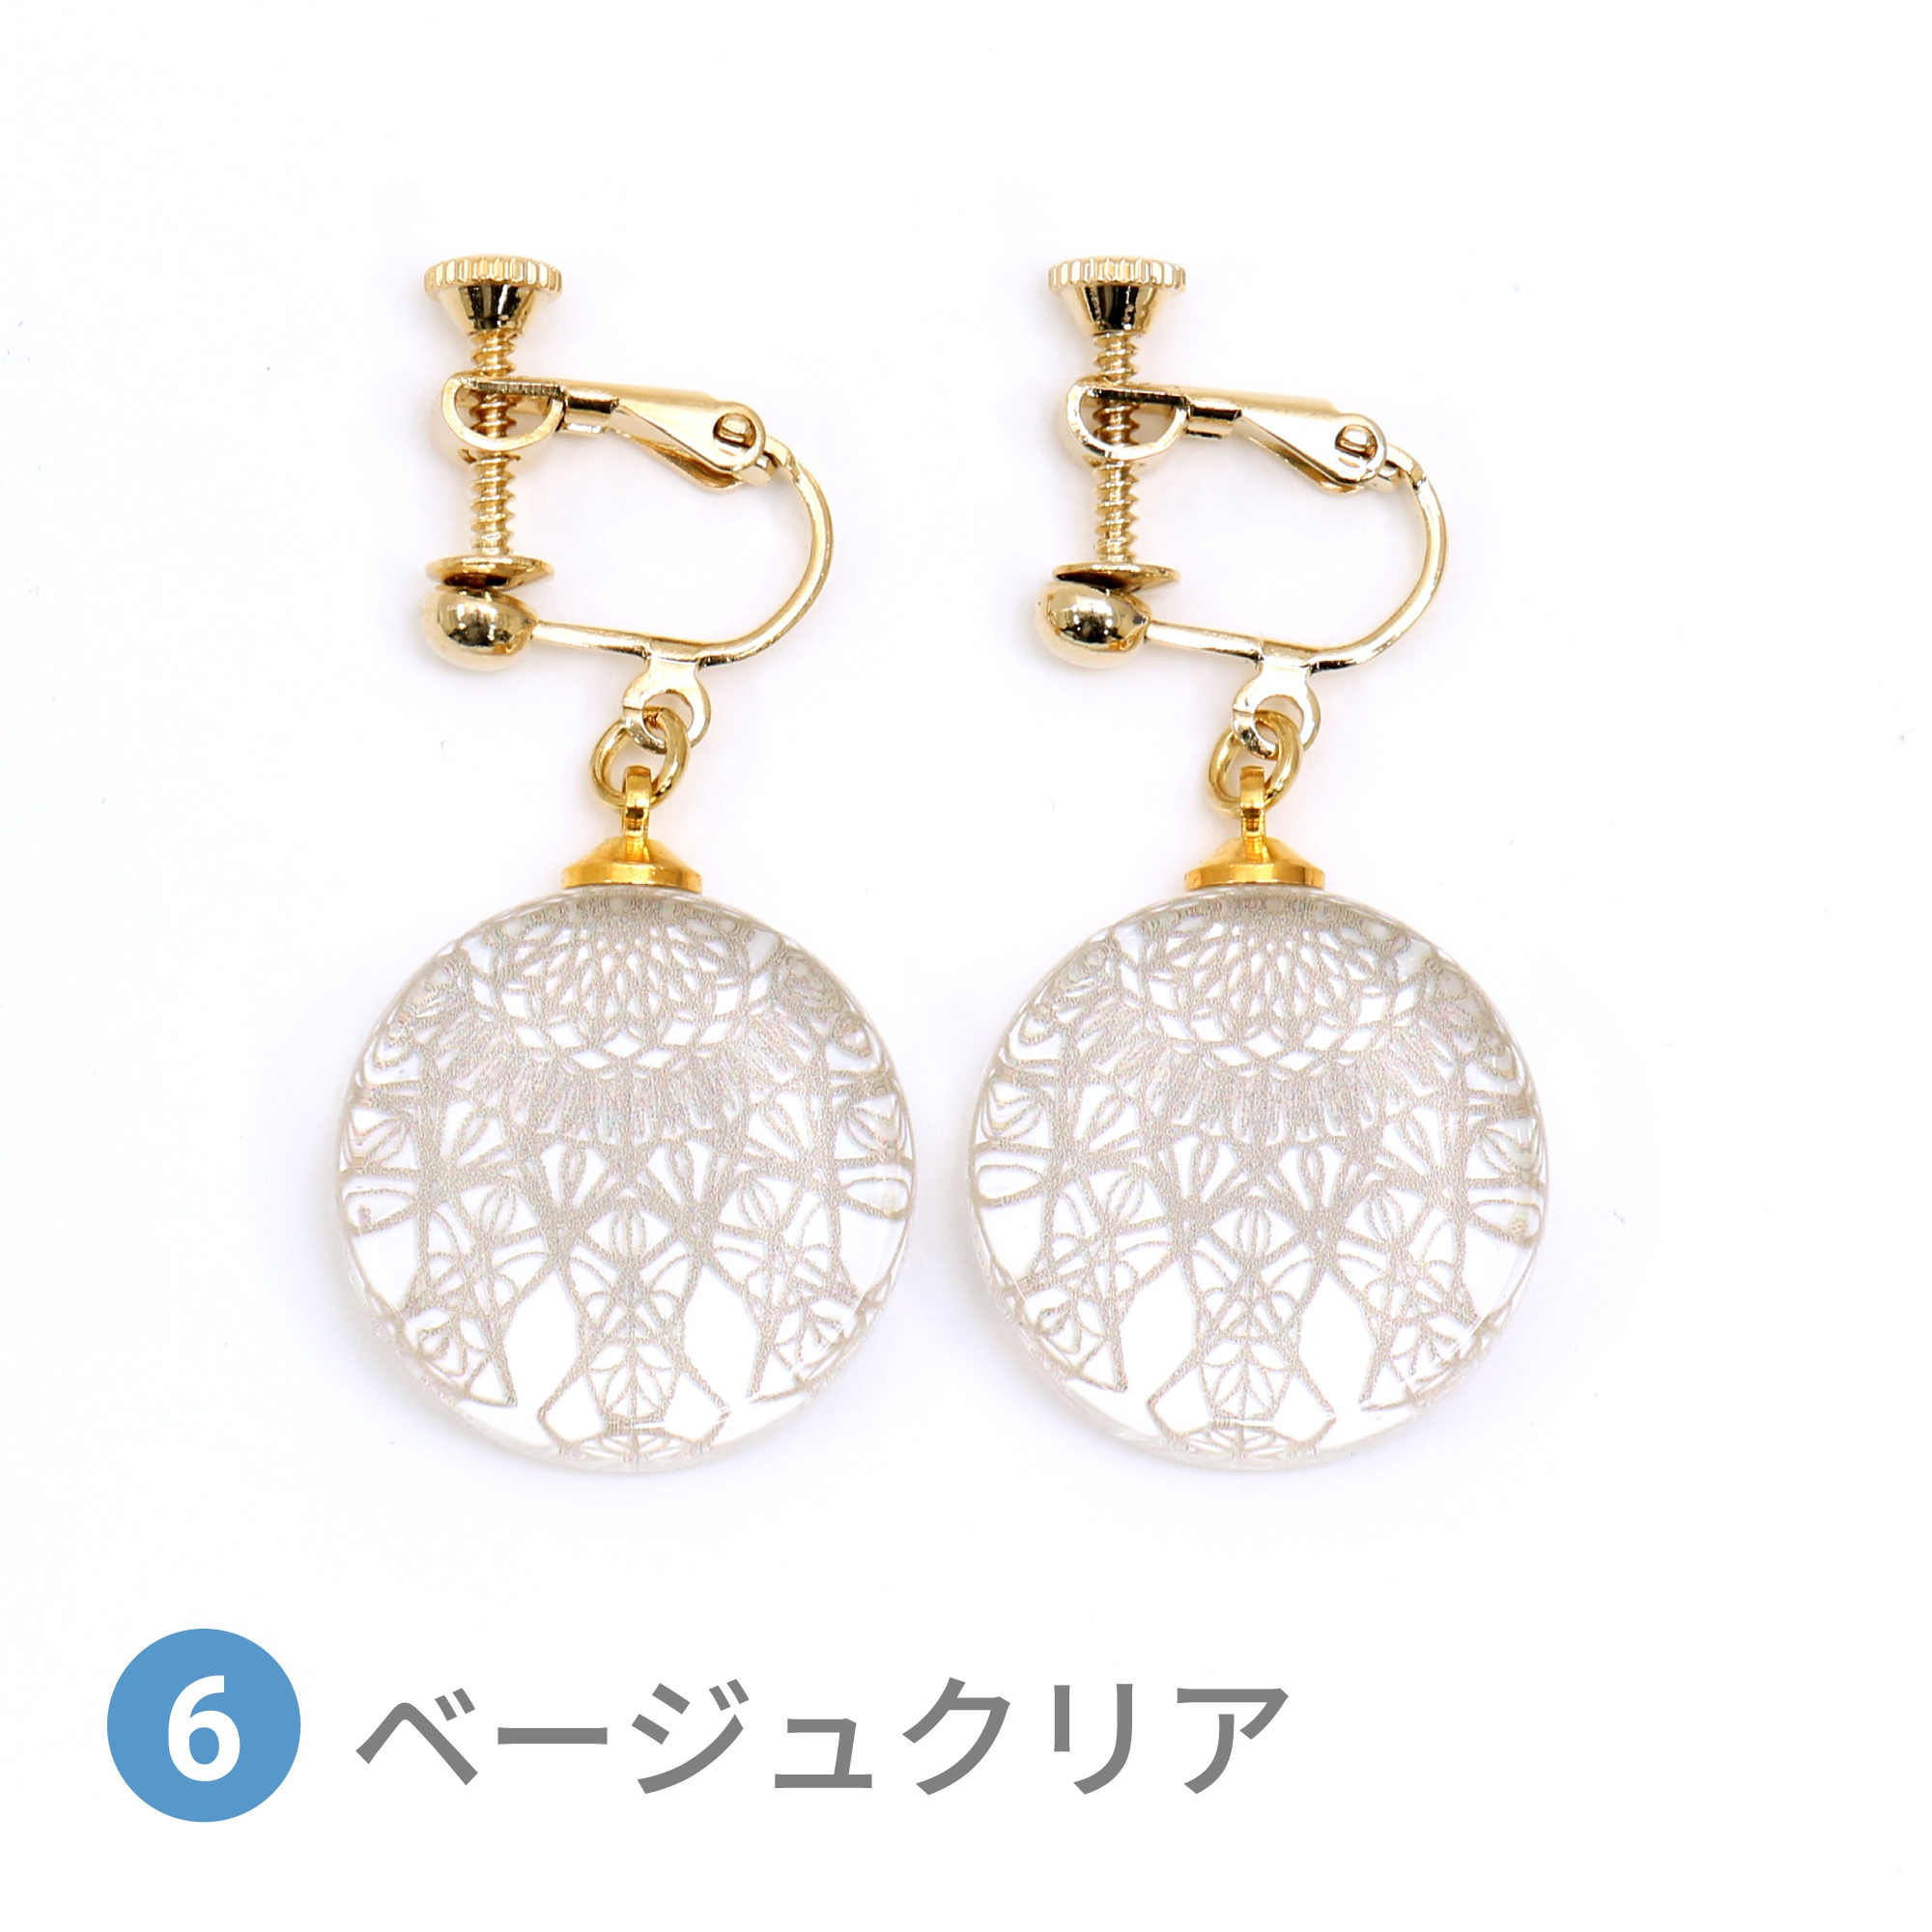 Glass accessories Earring LACE beige clear round shape